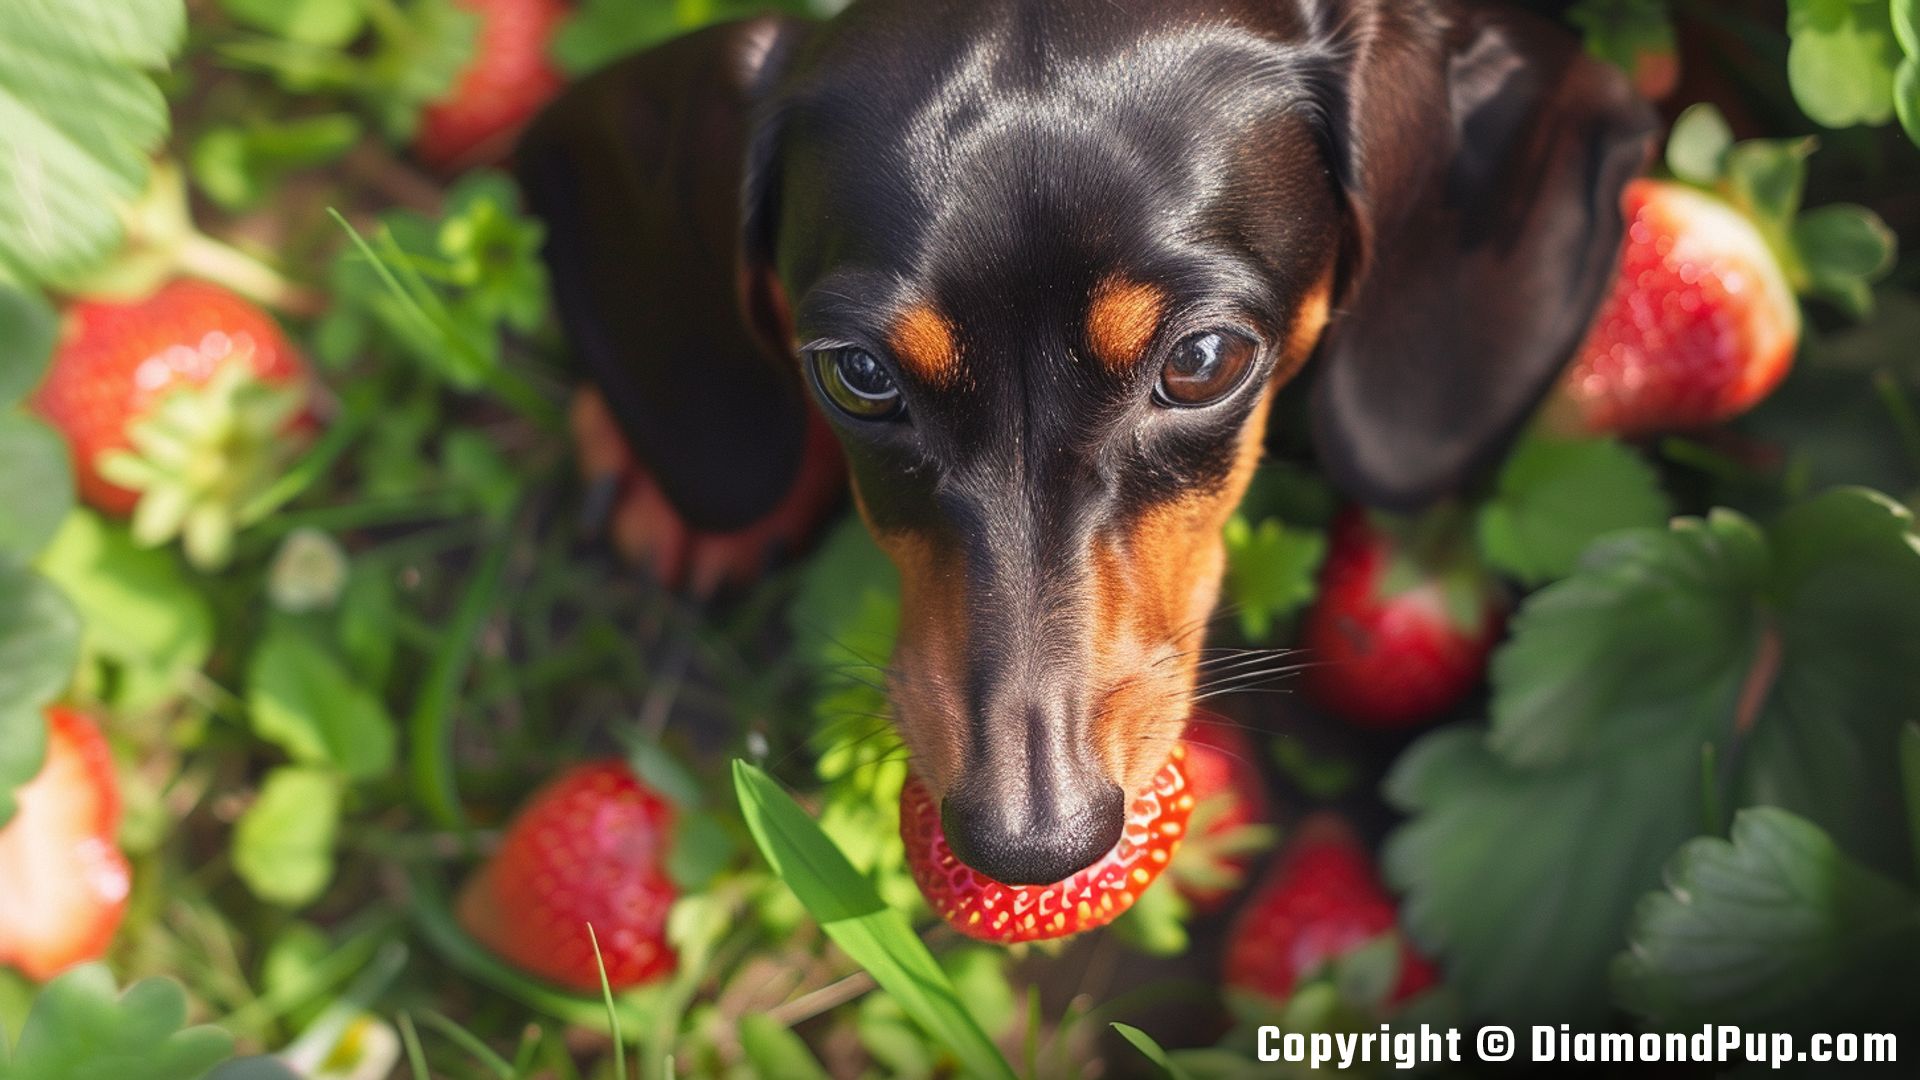 Image of a Playful Dachshund Snacking on Strawberries